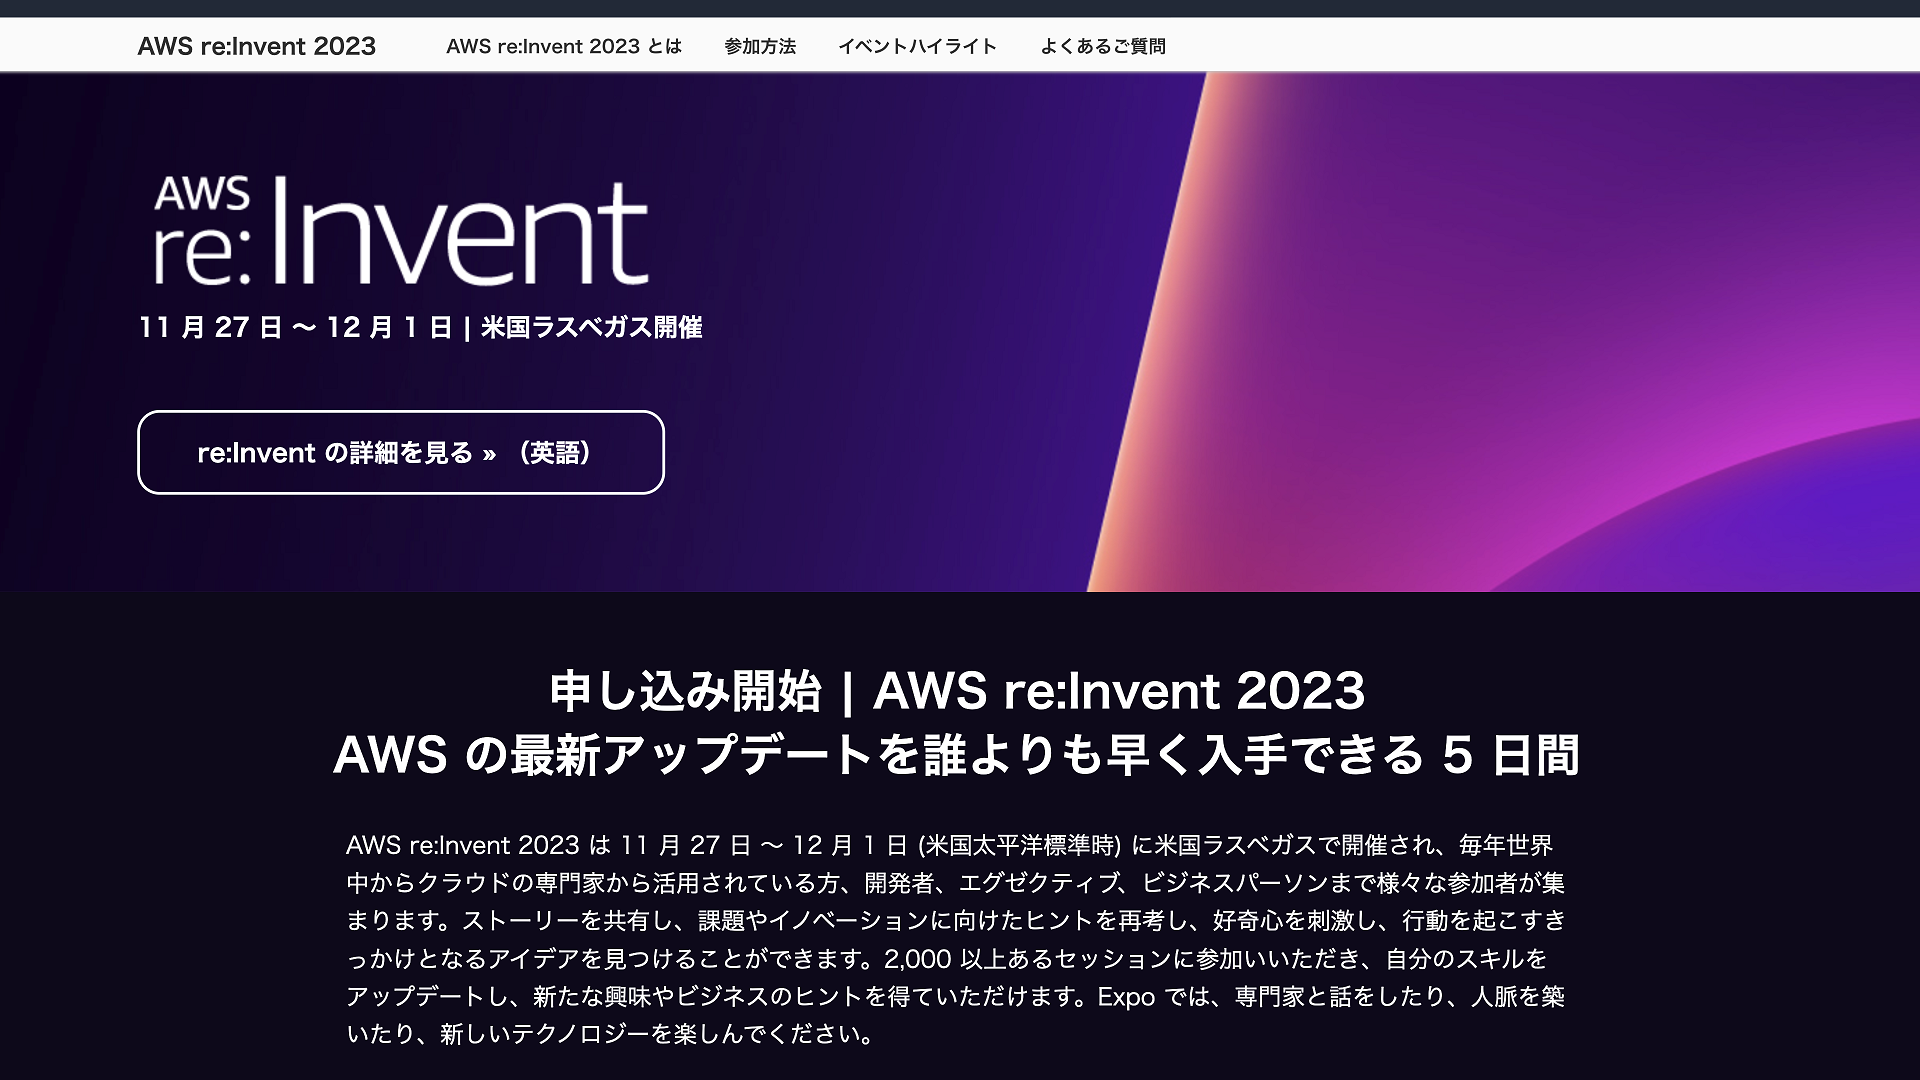 AWS re:Invent 2023 in Las Vegas いよいよスタート！